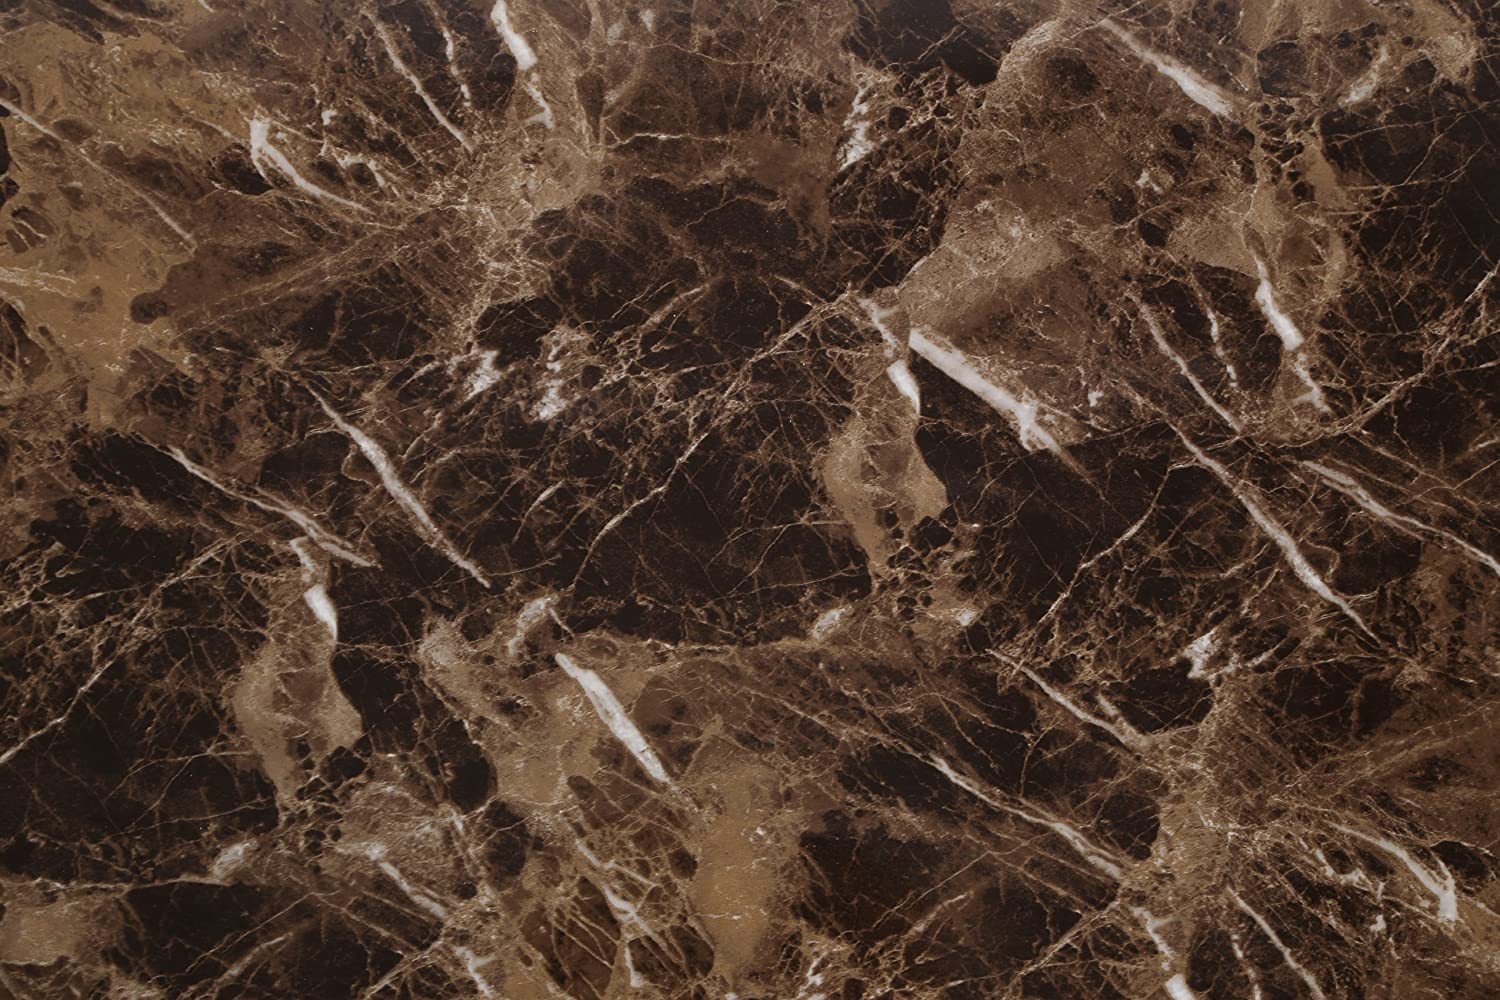 Brown Granite Look Marble Effect High Gloss Finish Self Adhesive 61cm X 2M (24 X 78.7), 0.23mm Peel and Stick Mural Wallpaper for Cabinet Shelf Drawer Liner, Table Furniture Reform (Pack of